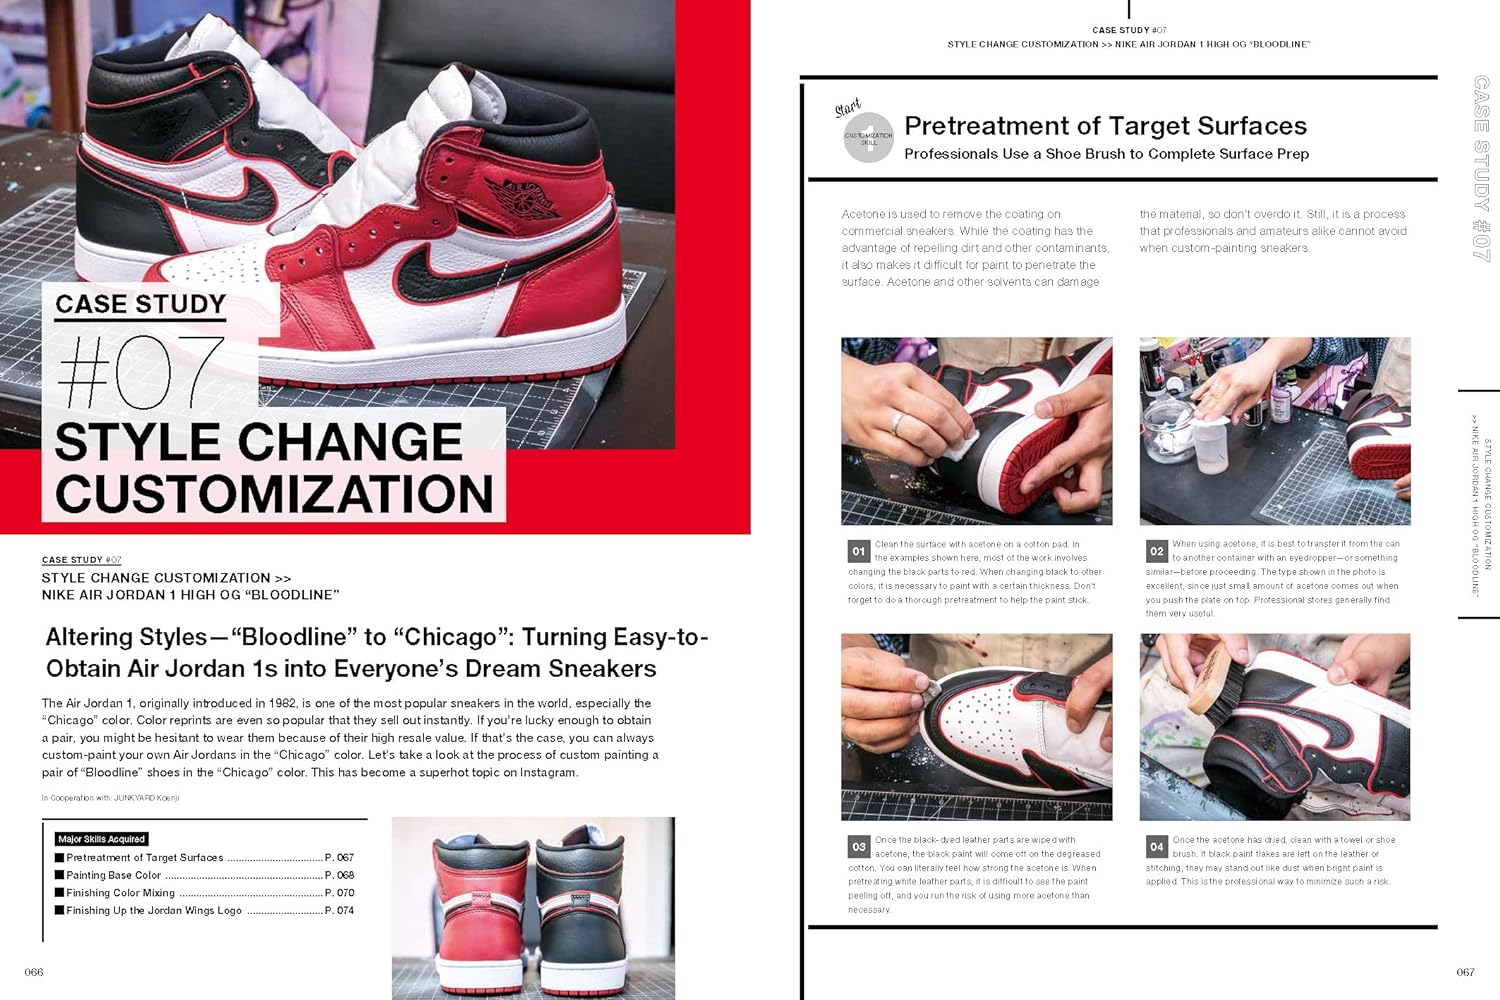 How to Customize Kicks: Step-by-Step Instructions and Inspiration from the Sneaker